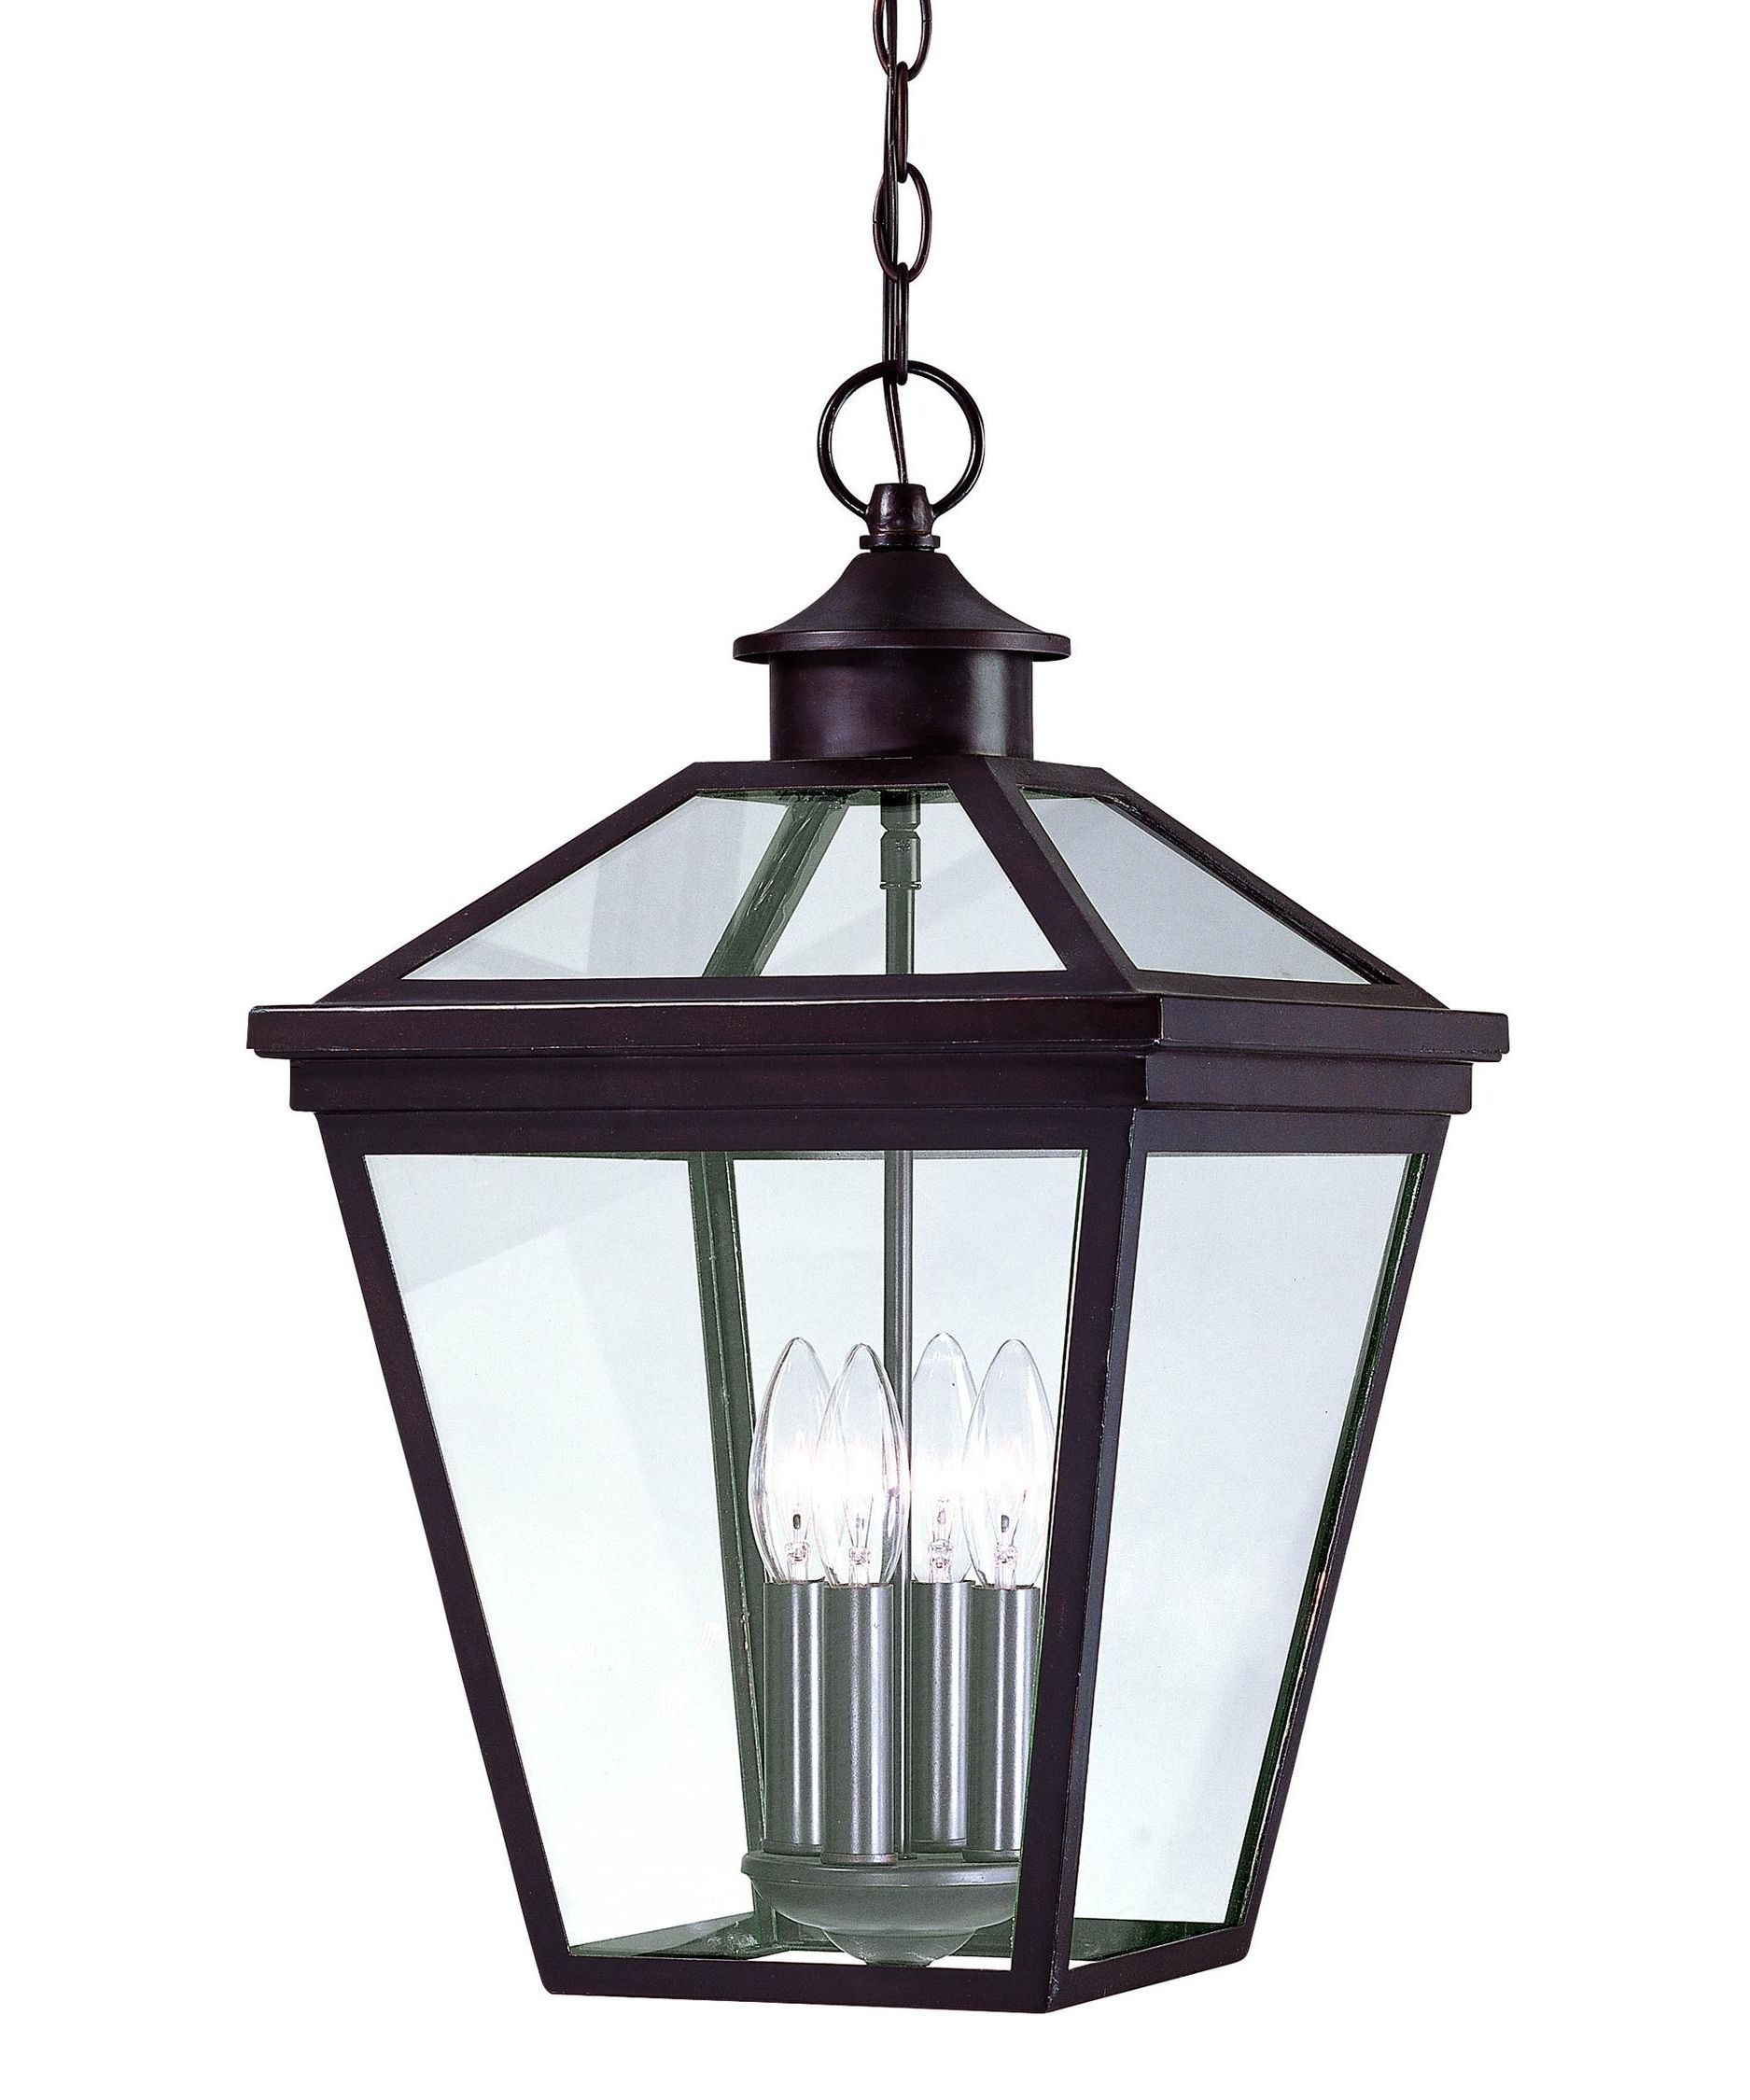 Famous Entertainment : Nuvo Light Large Outdoor Wall Lantern Central Park Pertaining To Modern Outdoor Hanging Lights (View 14 of 20)